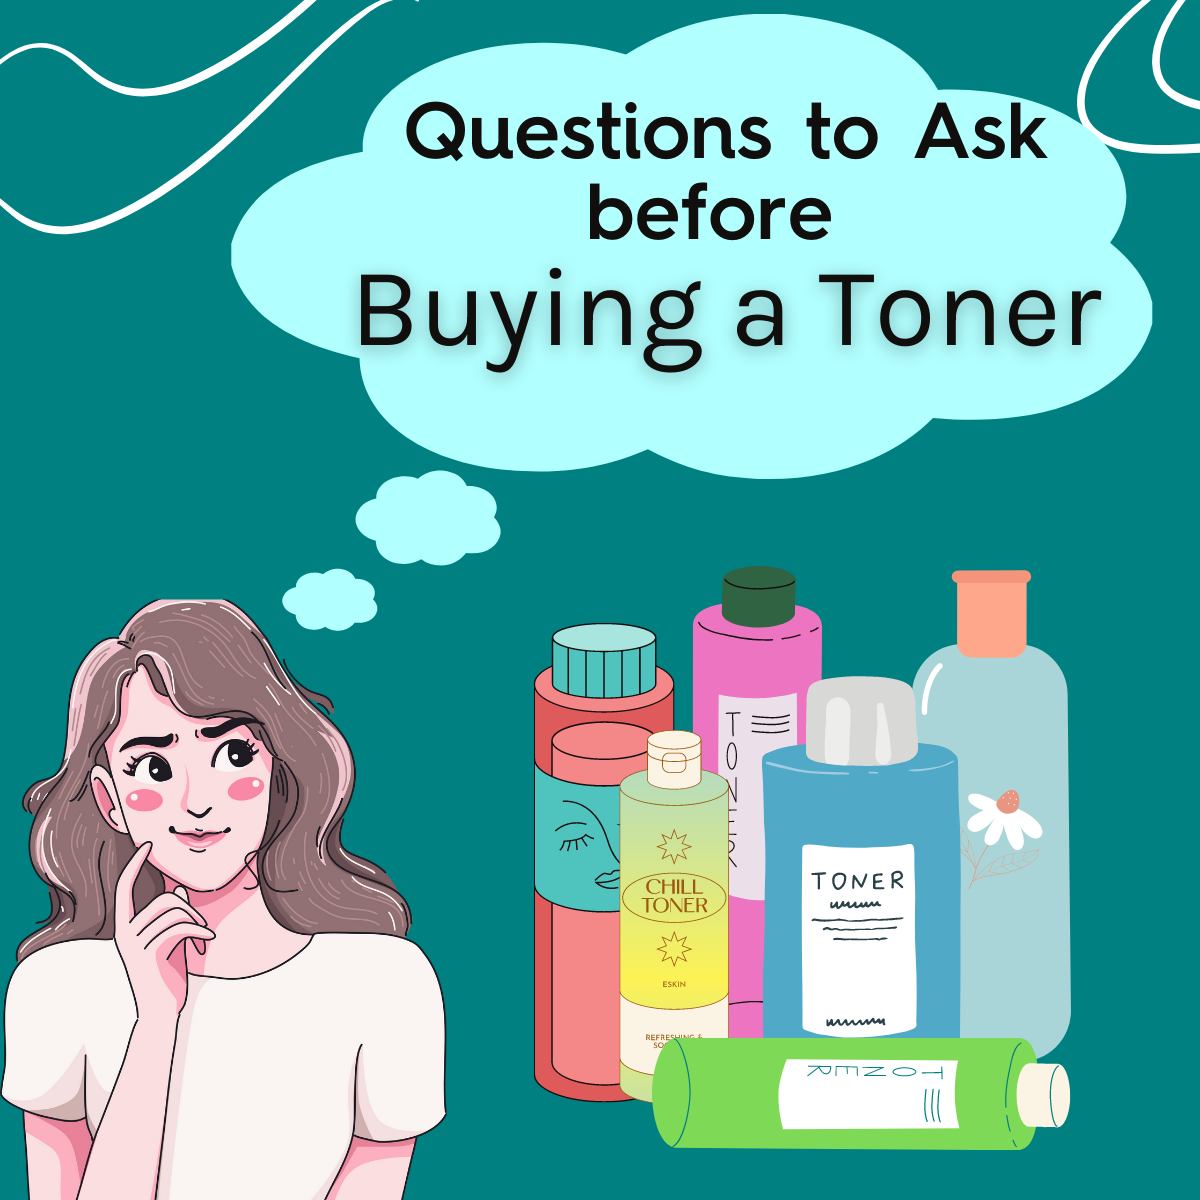 Questions to Ask Before Buying a Toner